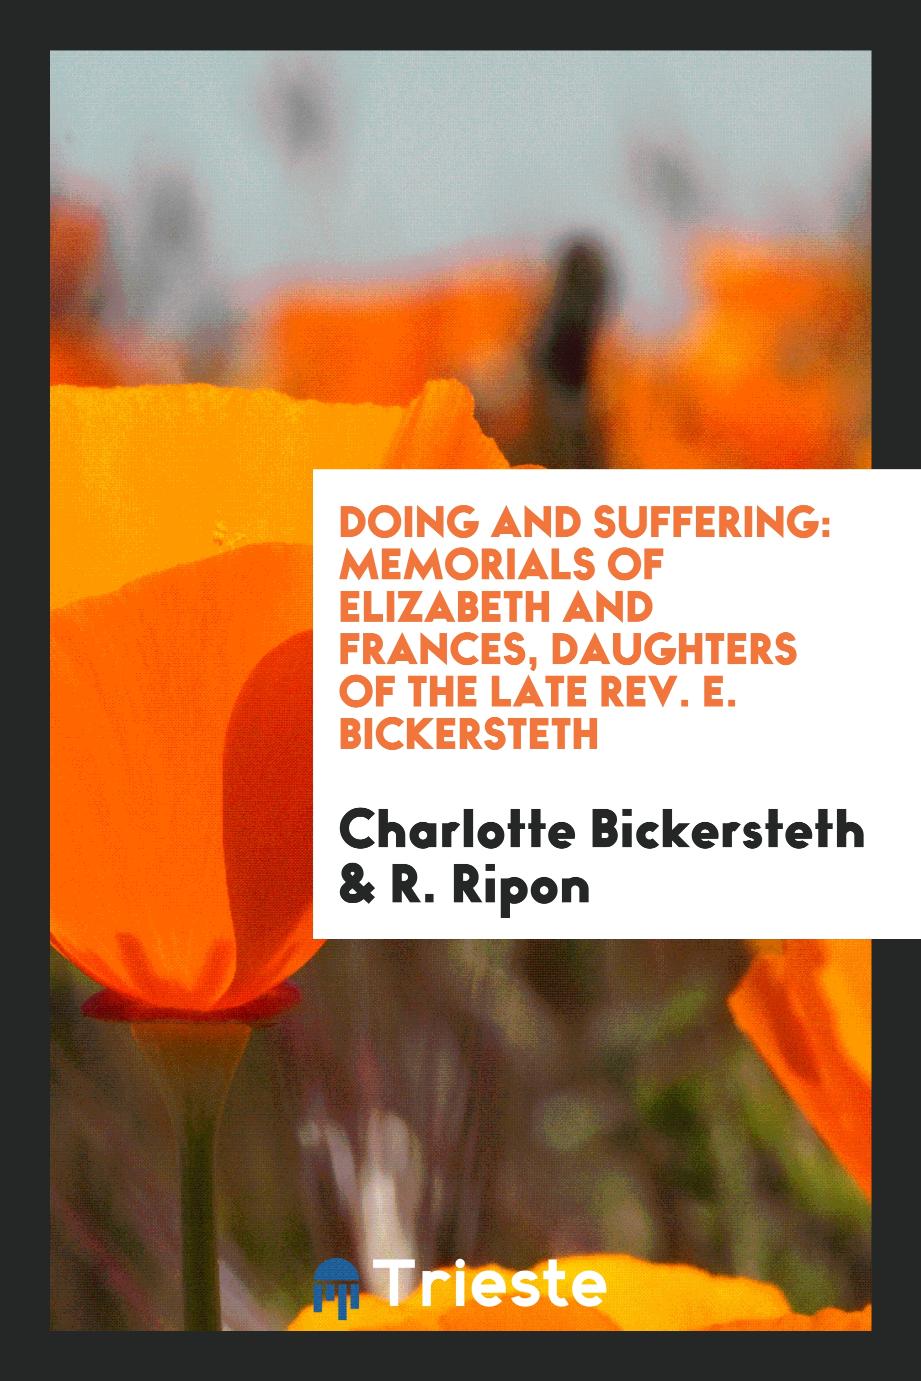 Doing and Suffering: Memorials of Elizabeth and Frances, Daughters of the Late Rev. E. Bickersteth